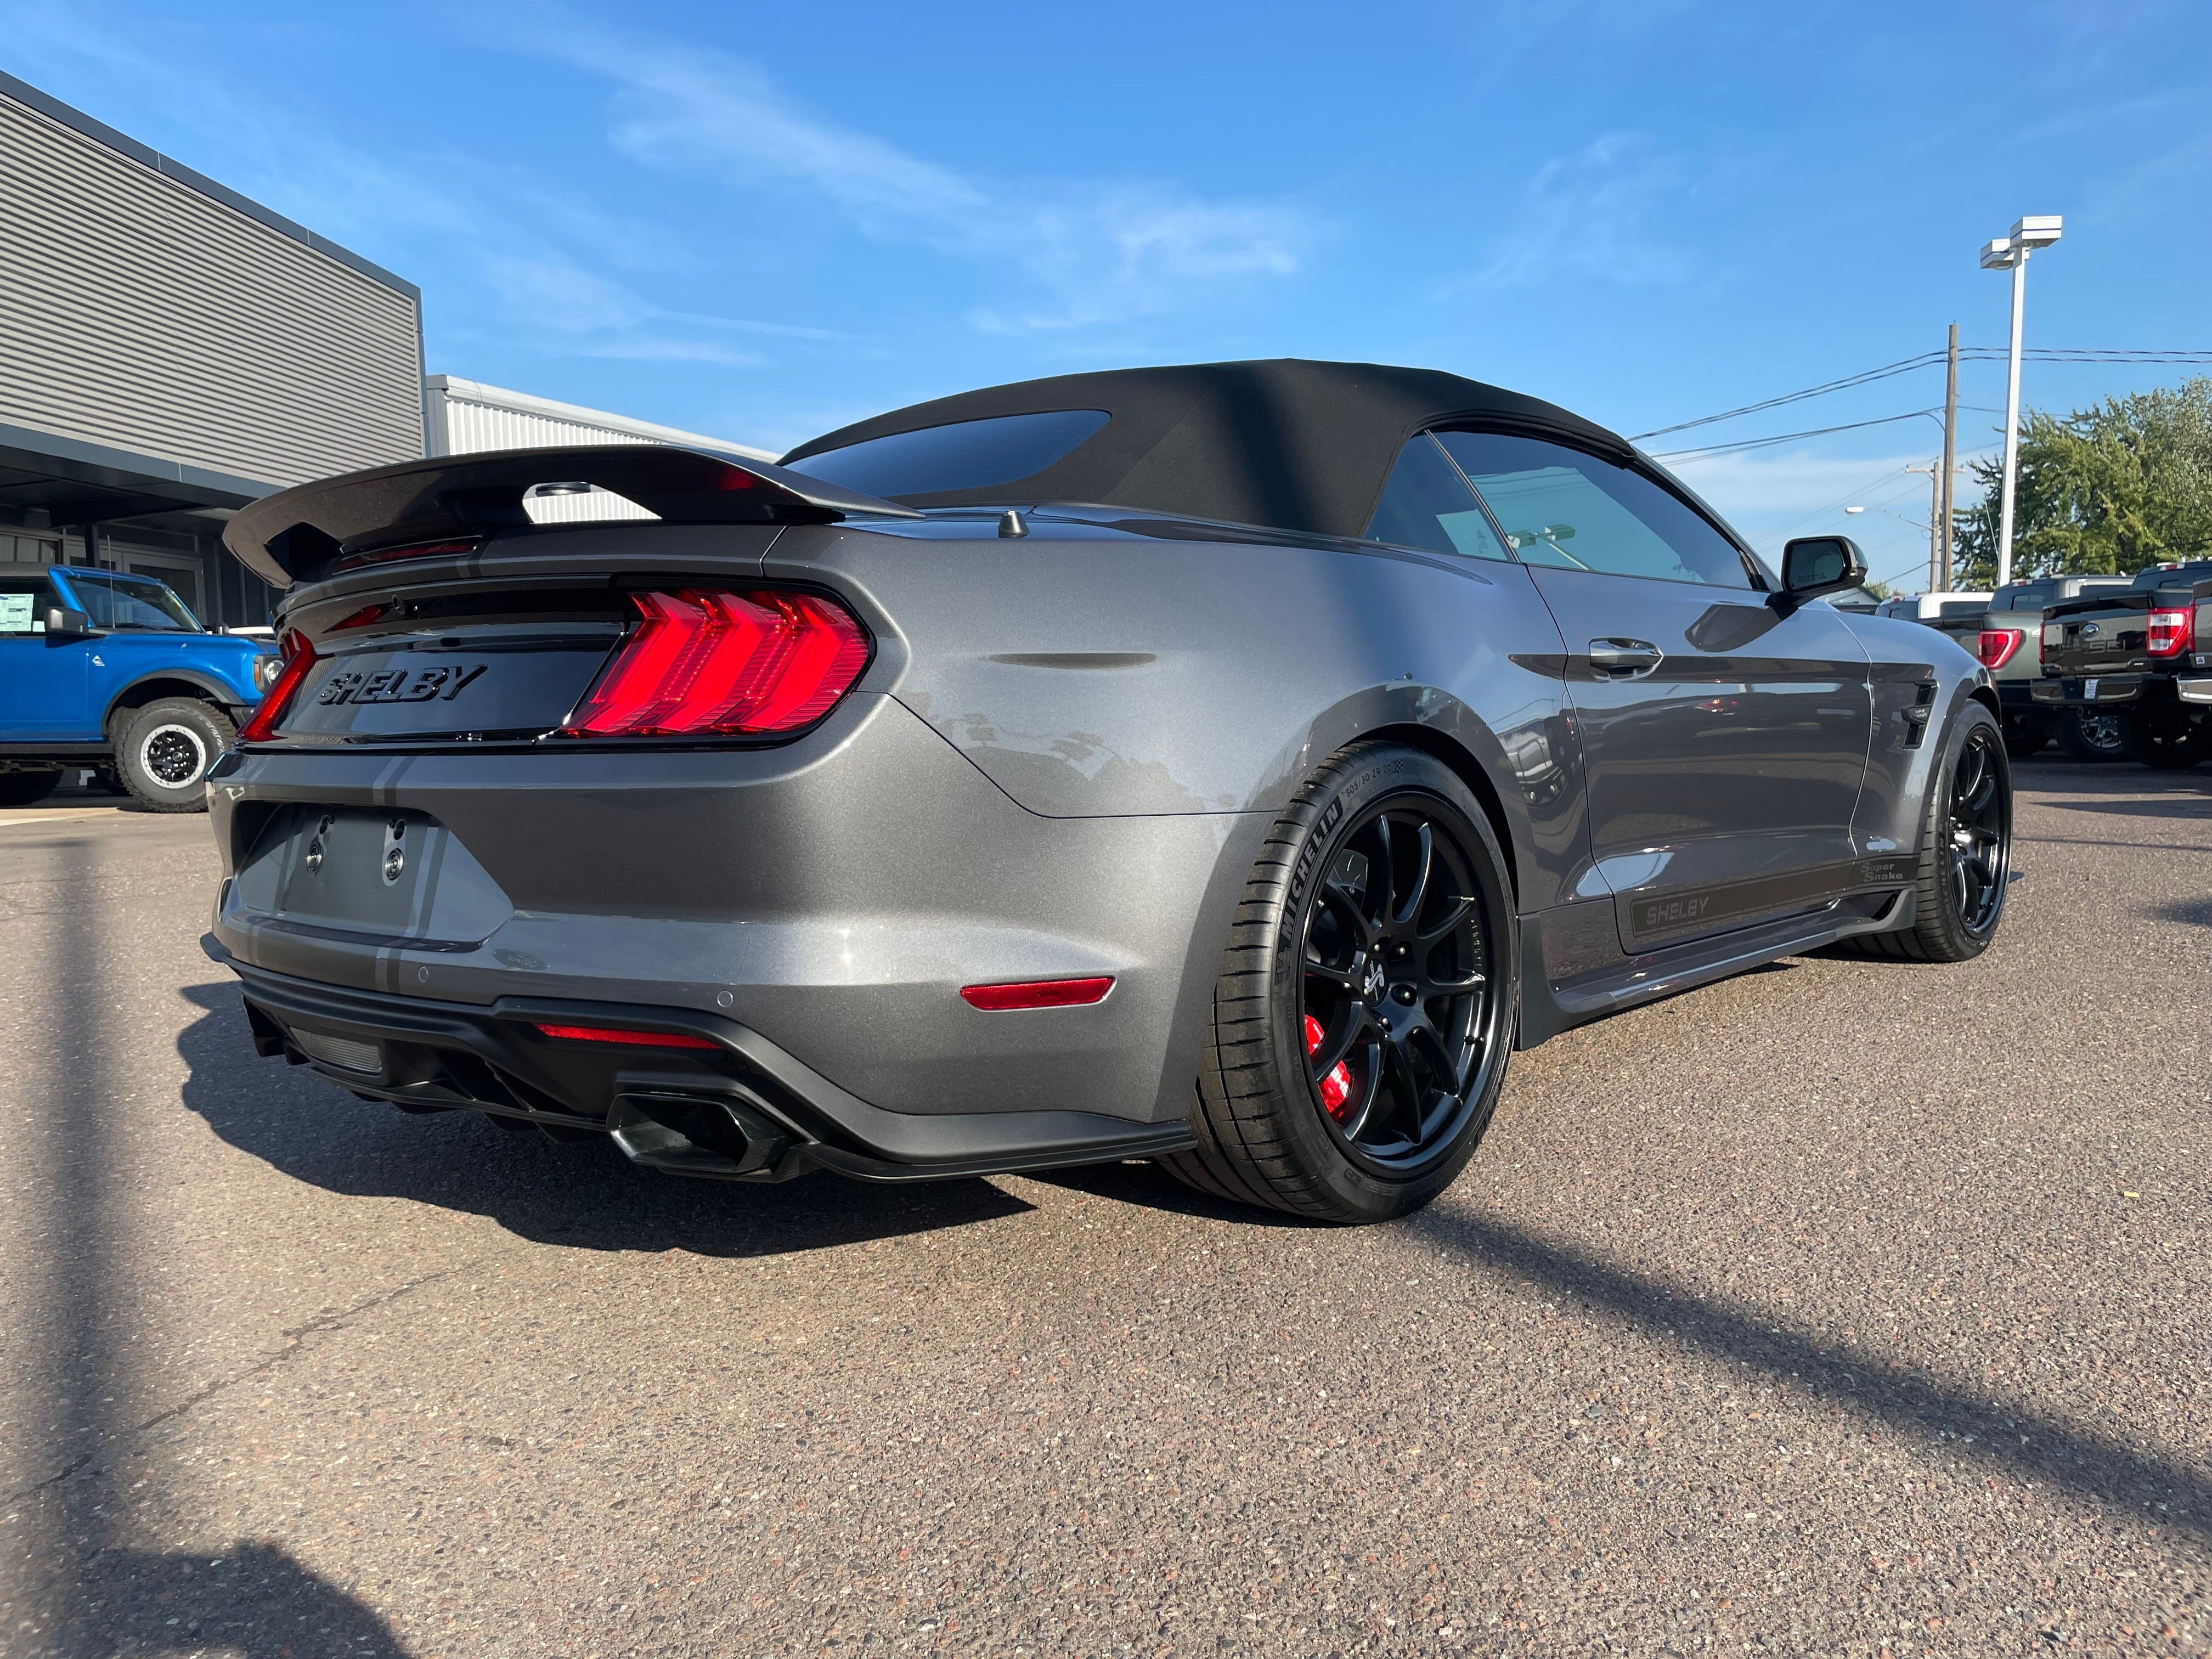 2023 Ford Mustang Shelby Super Snake 825 HP